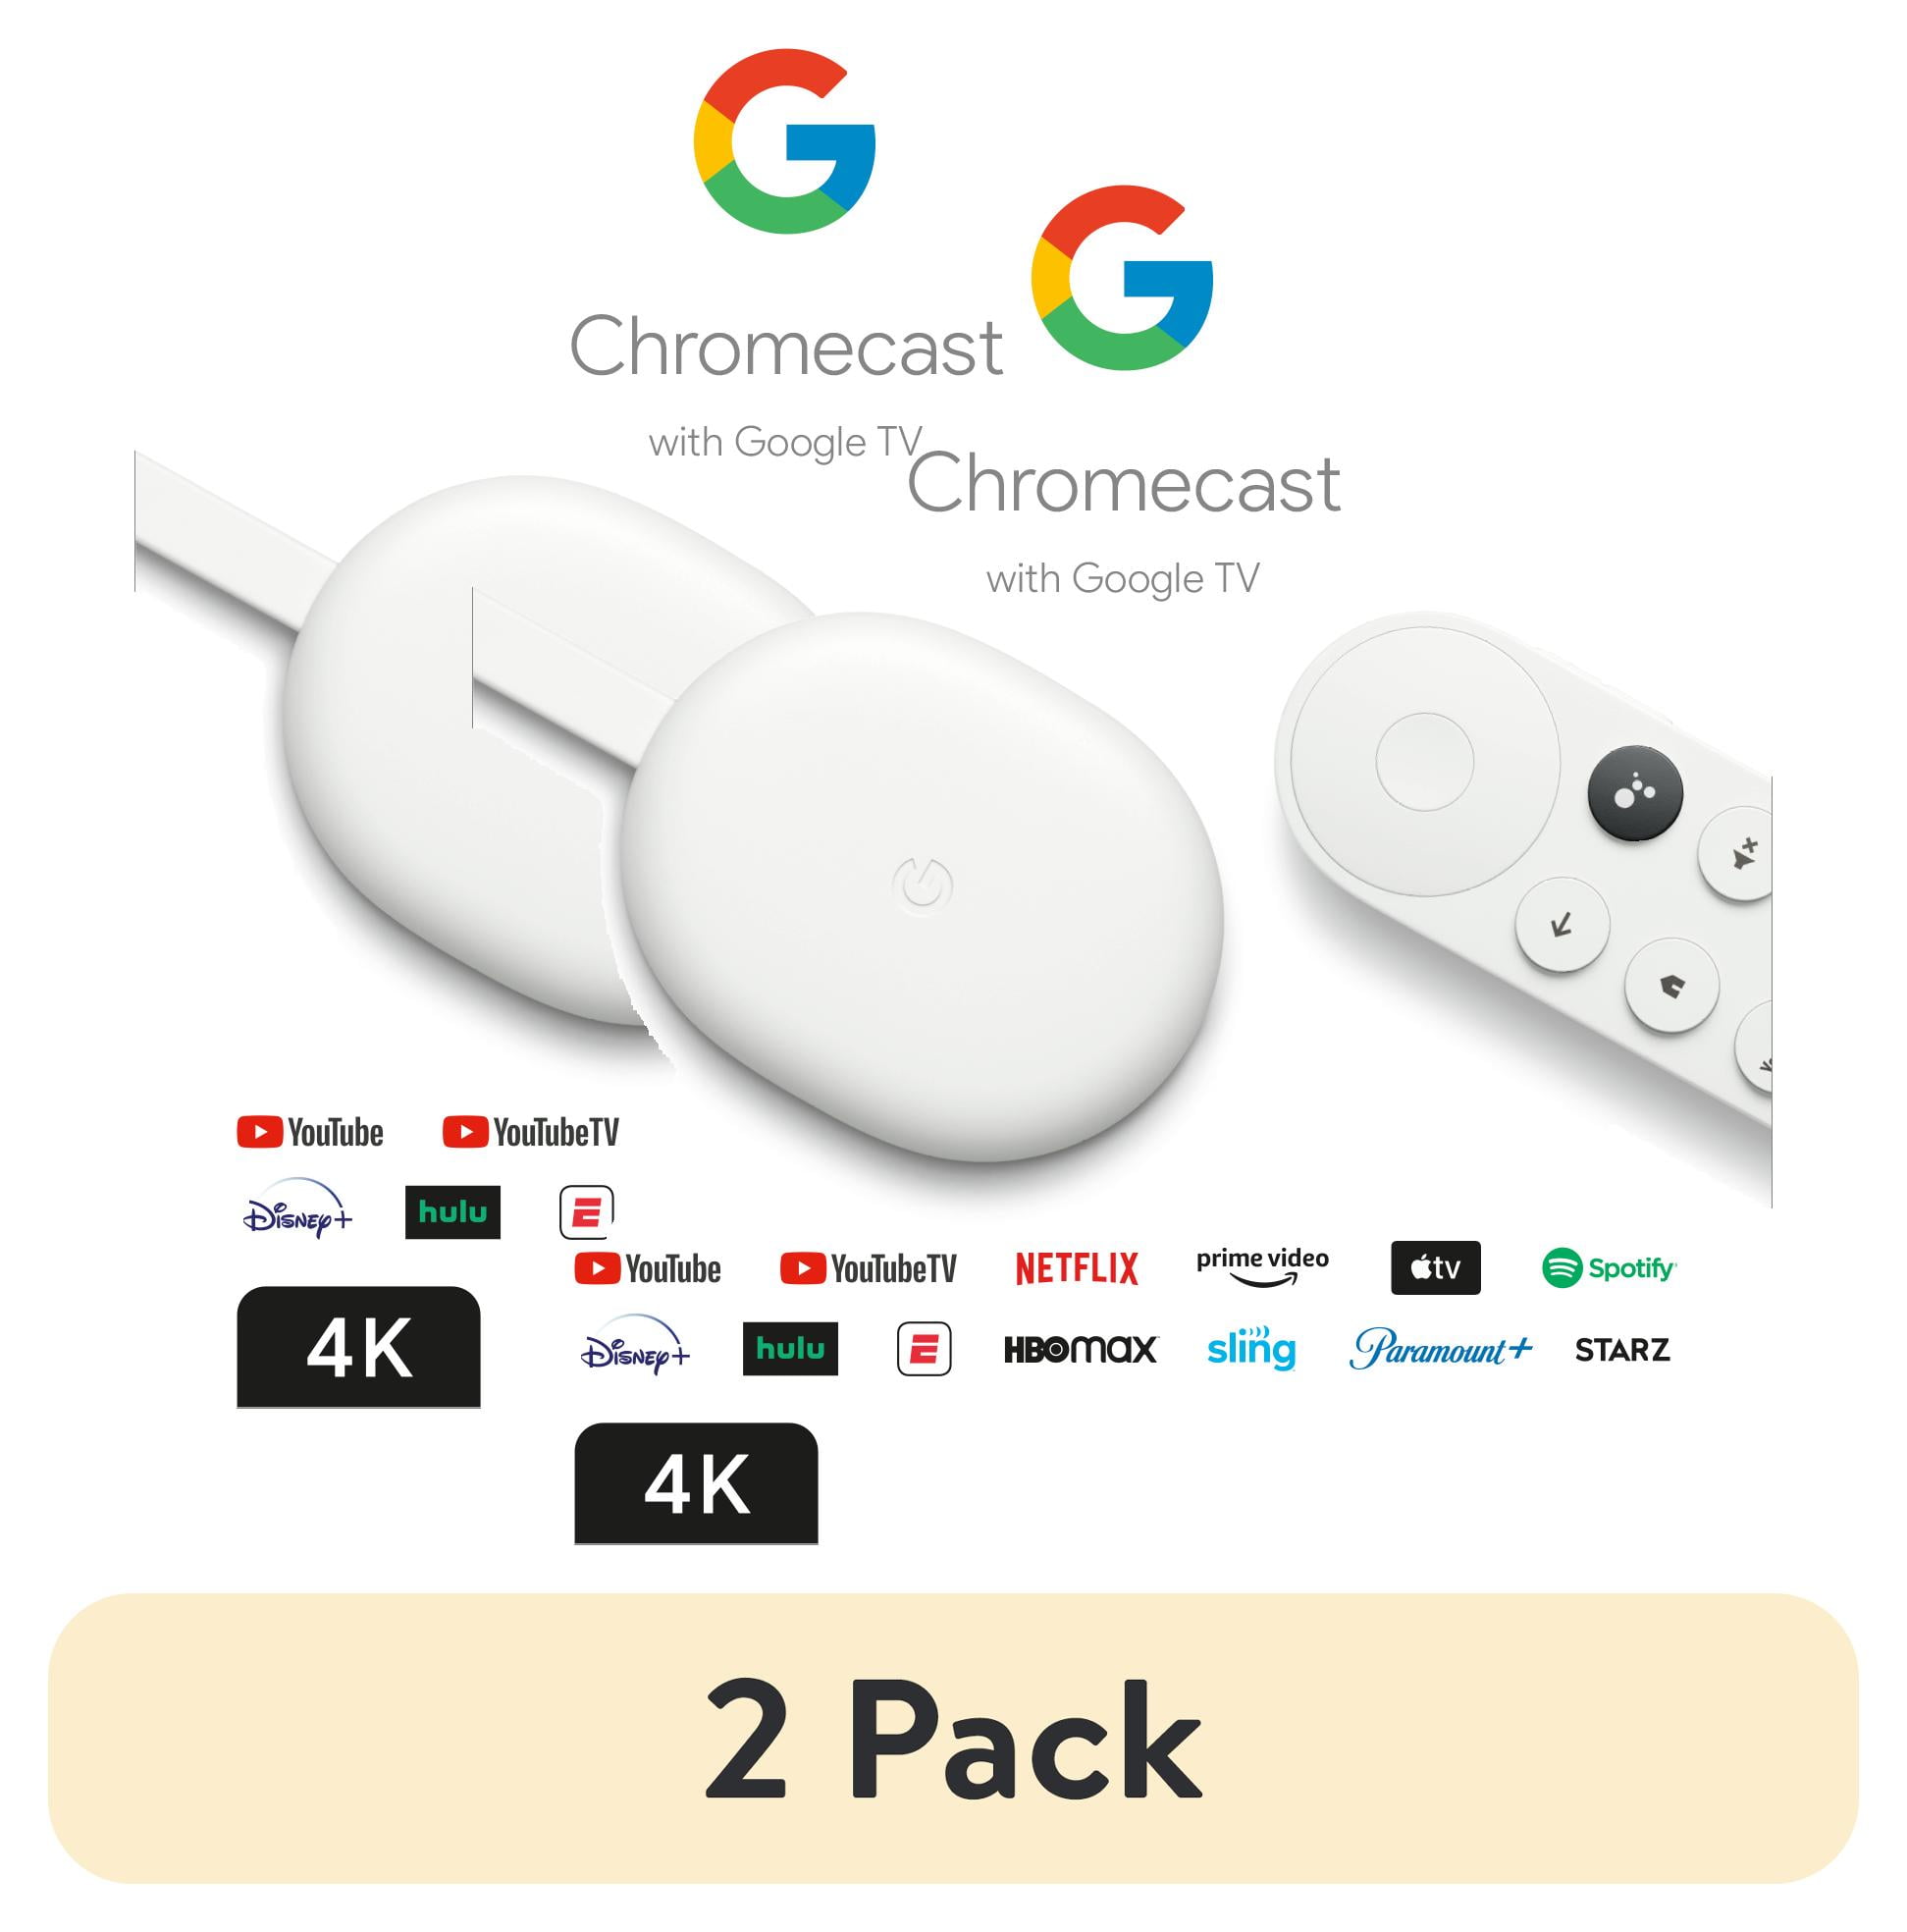 (3 pack) Chromecast with Google TV - Streaming Entertainment in 4K HDR